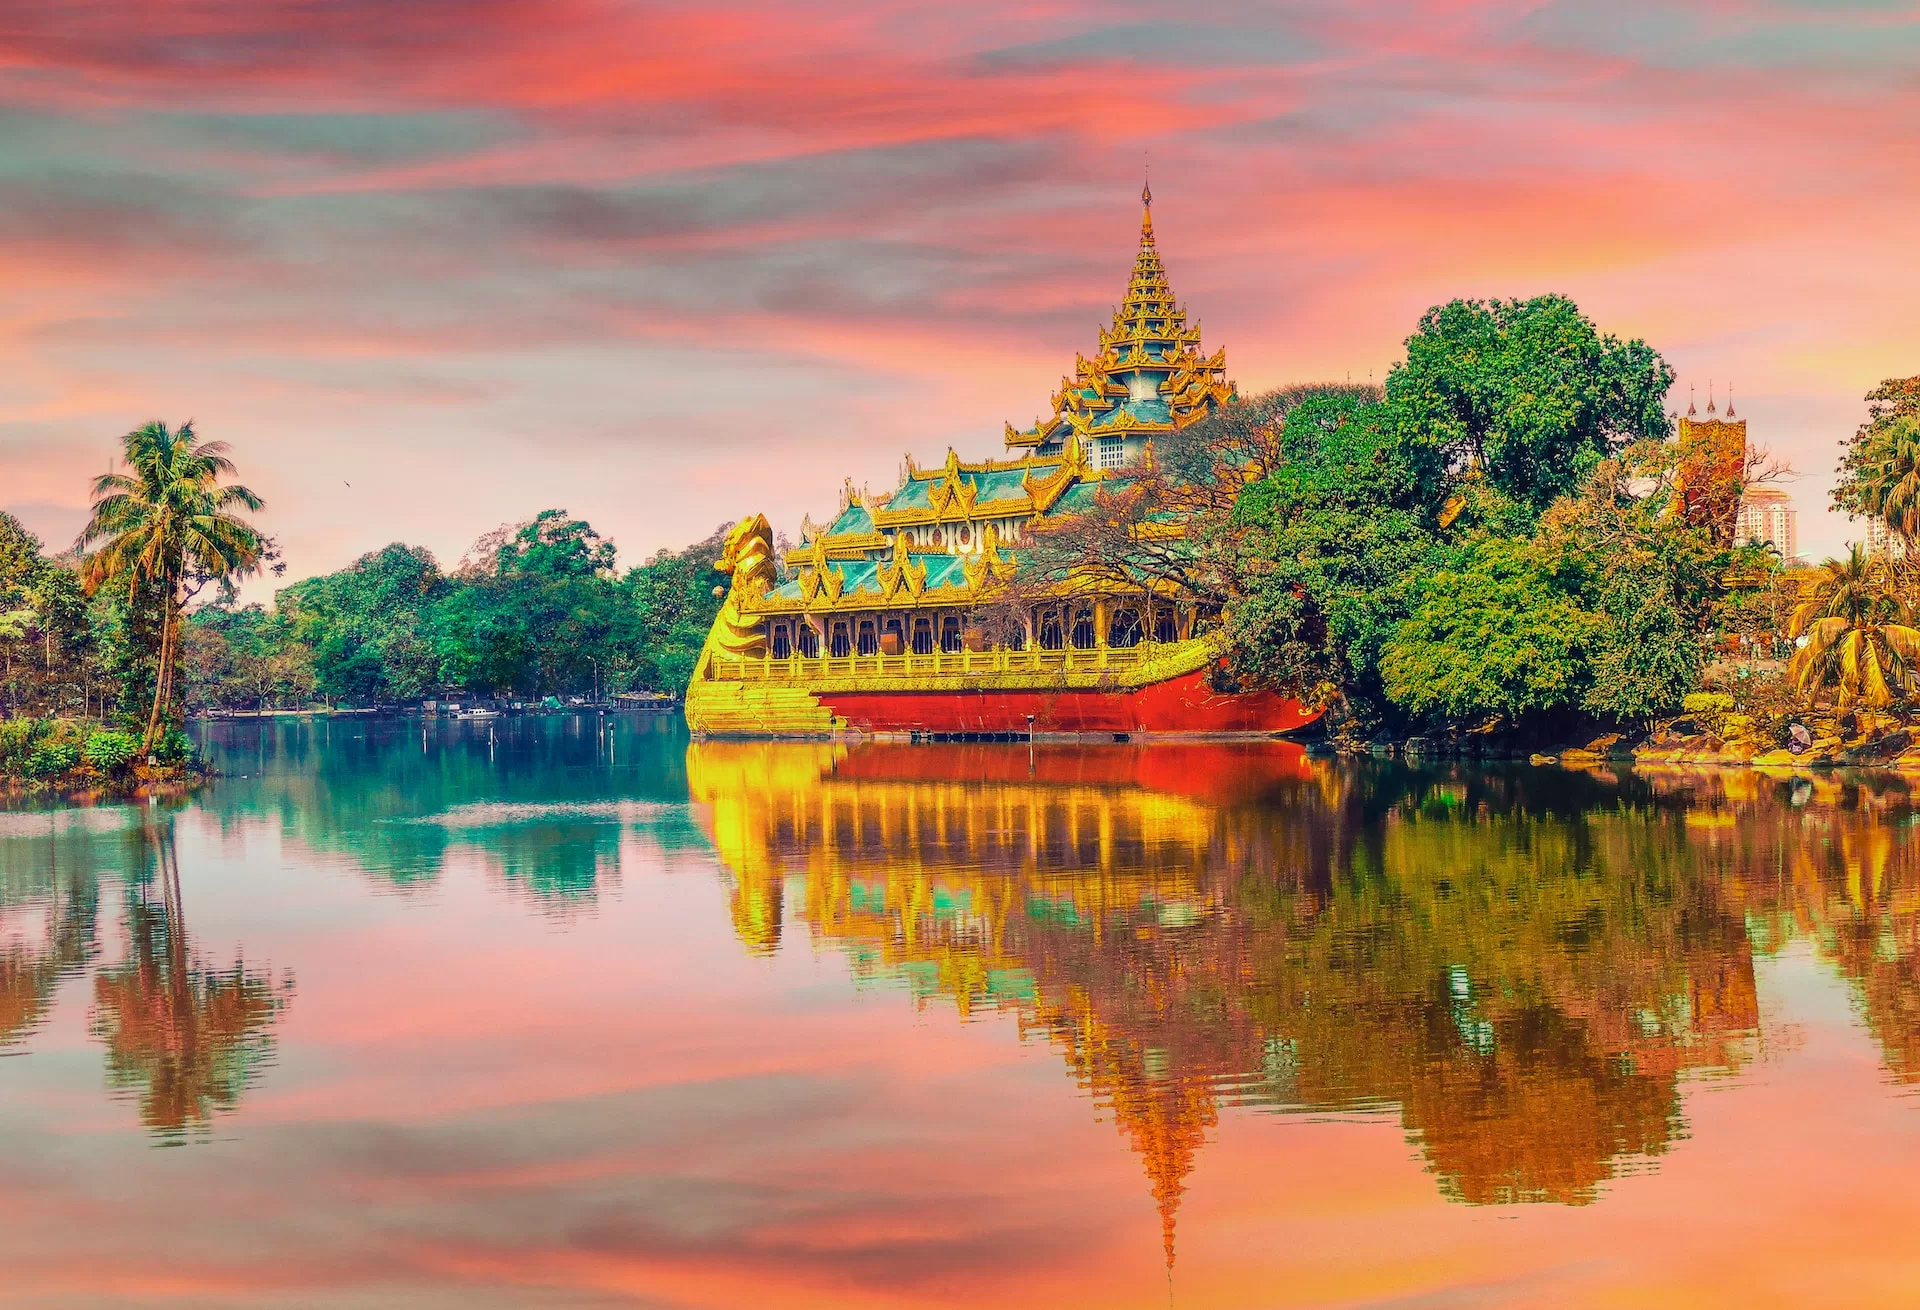 Pic of a Thai temple reflecting on the water at sunset.